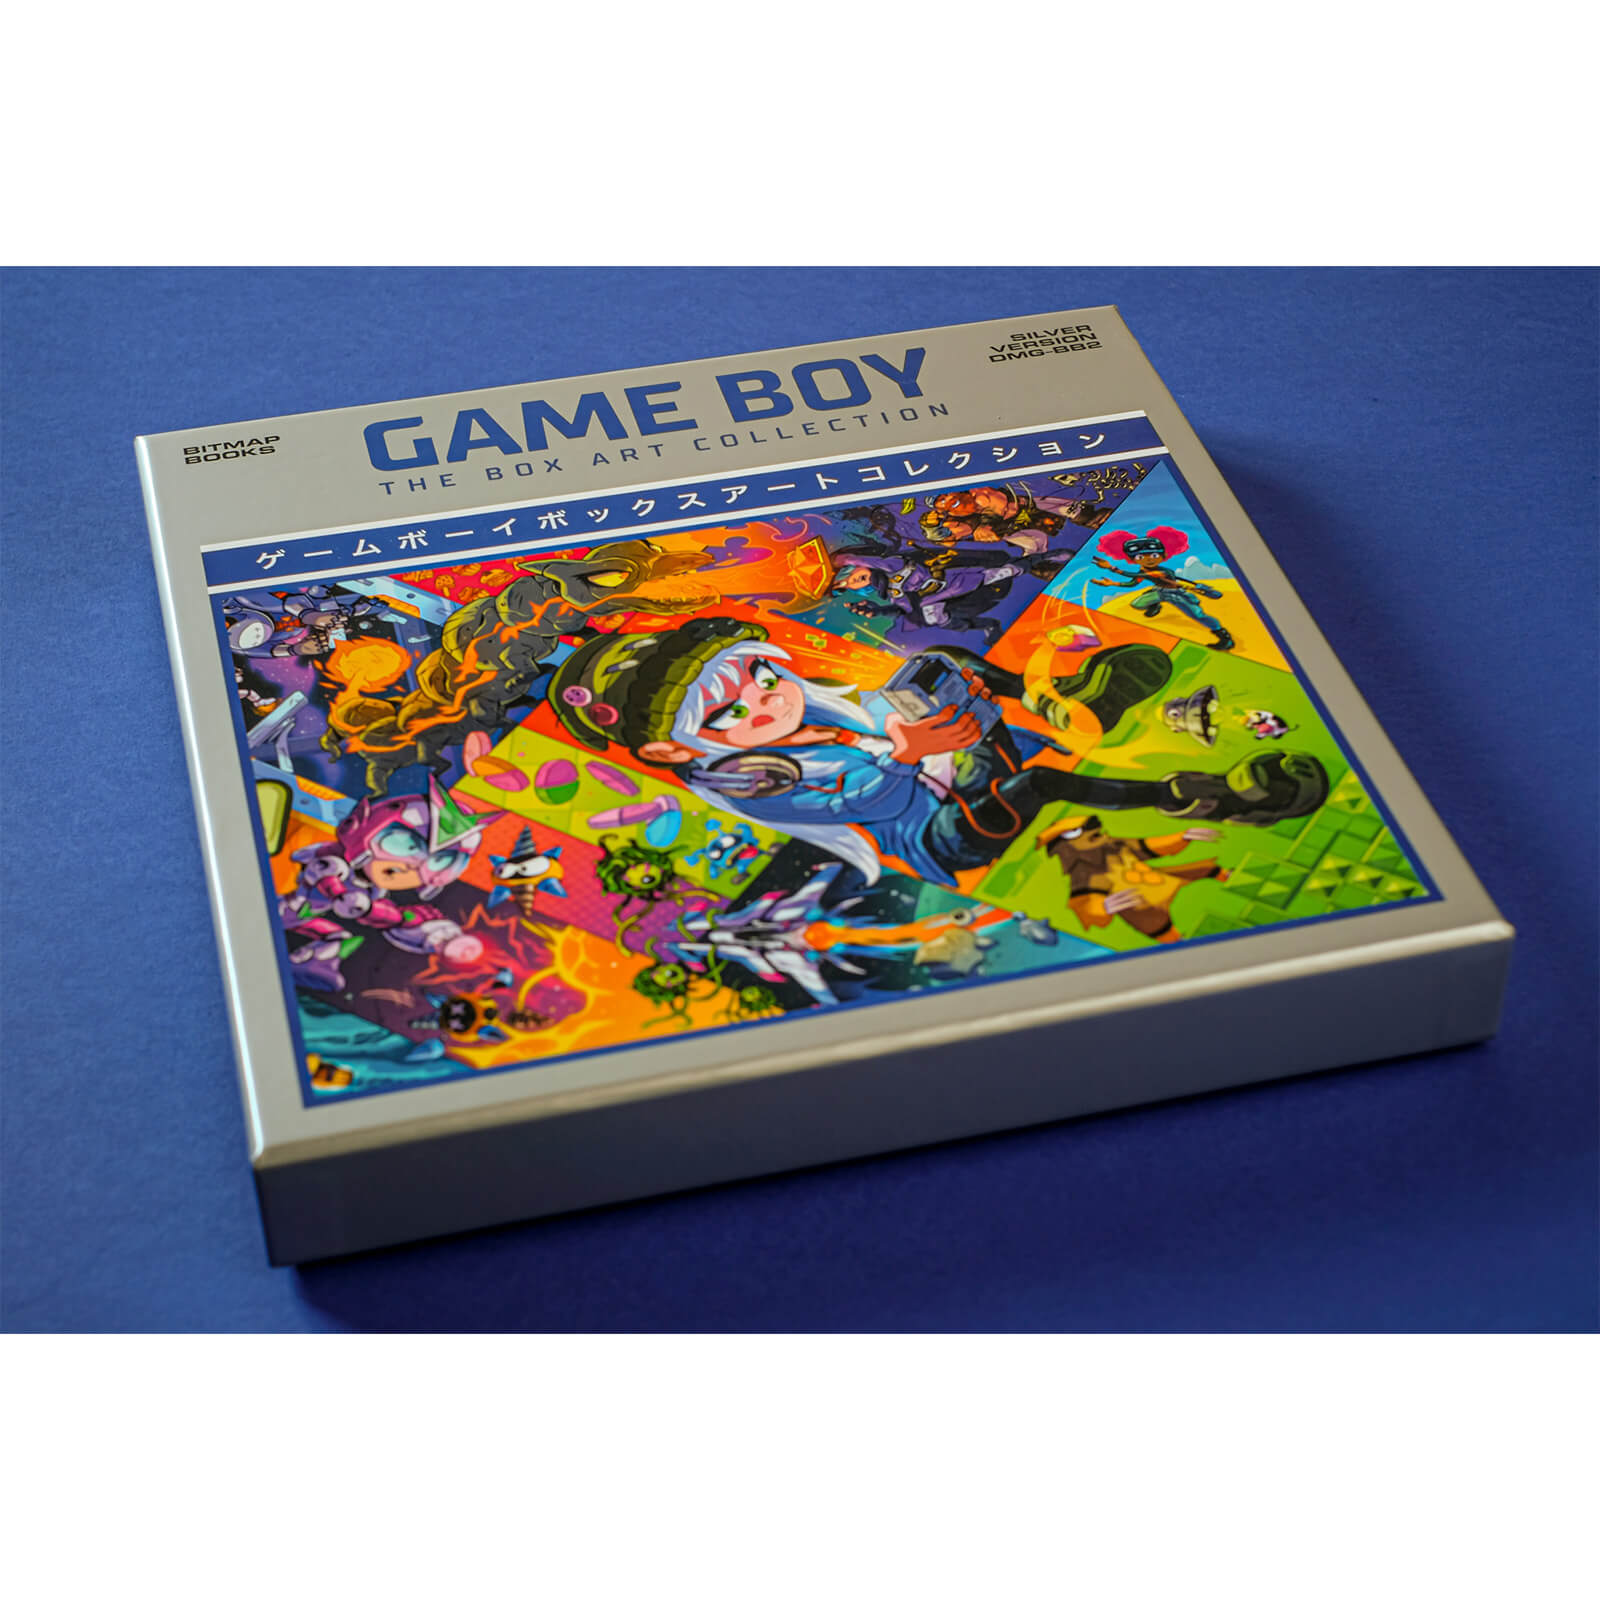 Game Boy: The Box Art Collection Limited Silver Version by Bitmap Books